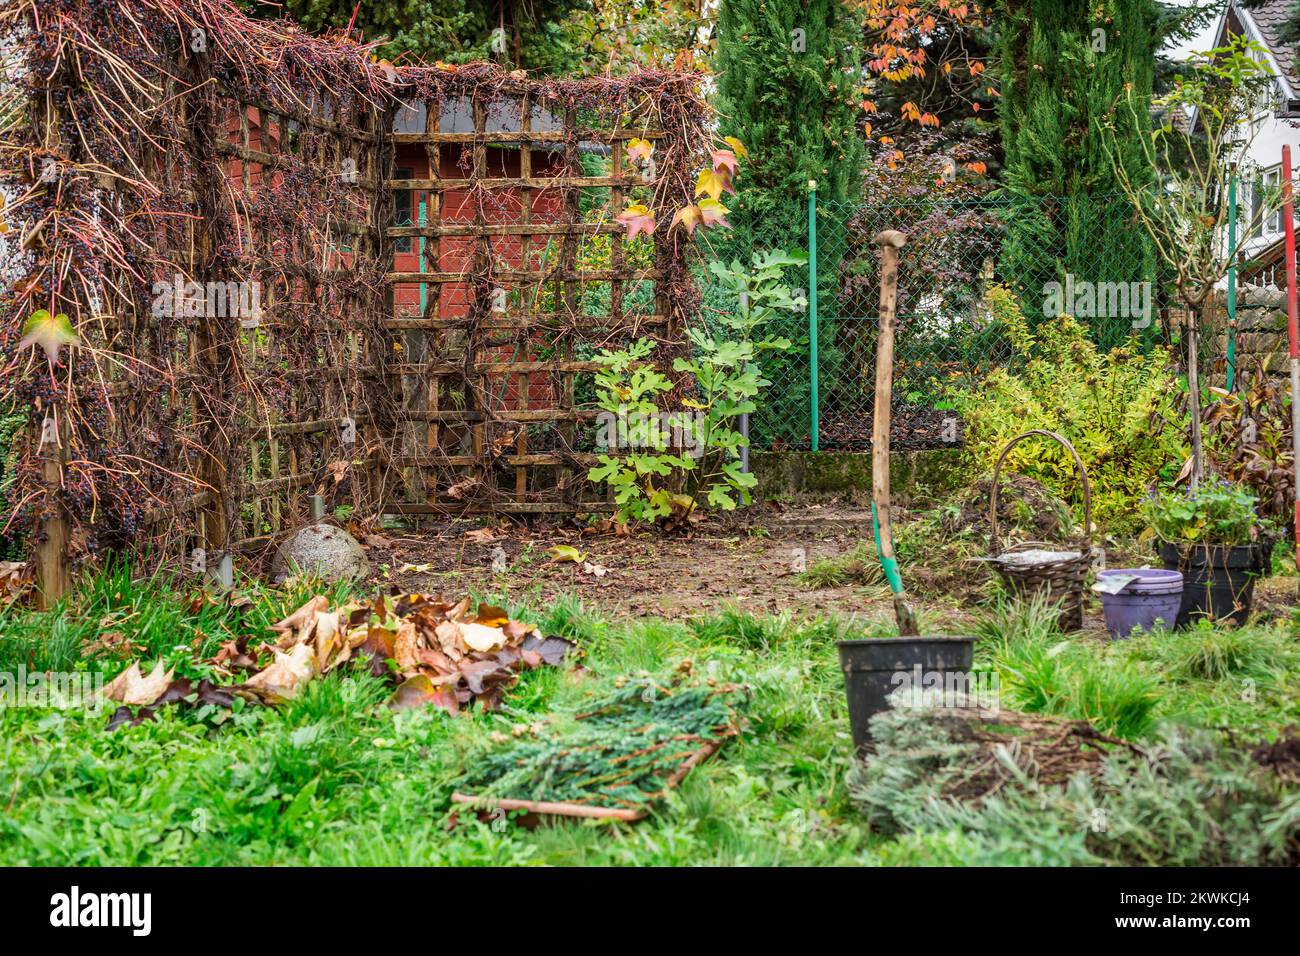 Autumn and winter gardening - natural privacy screen made of wild grapes  (Parthenocissus quinquefolia) Stock Photo